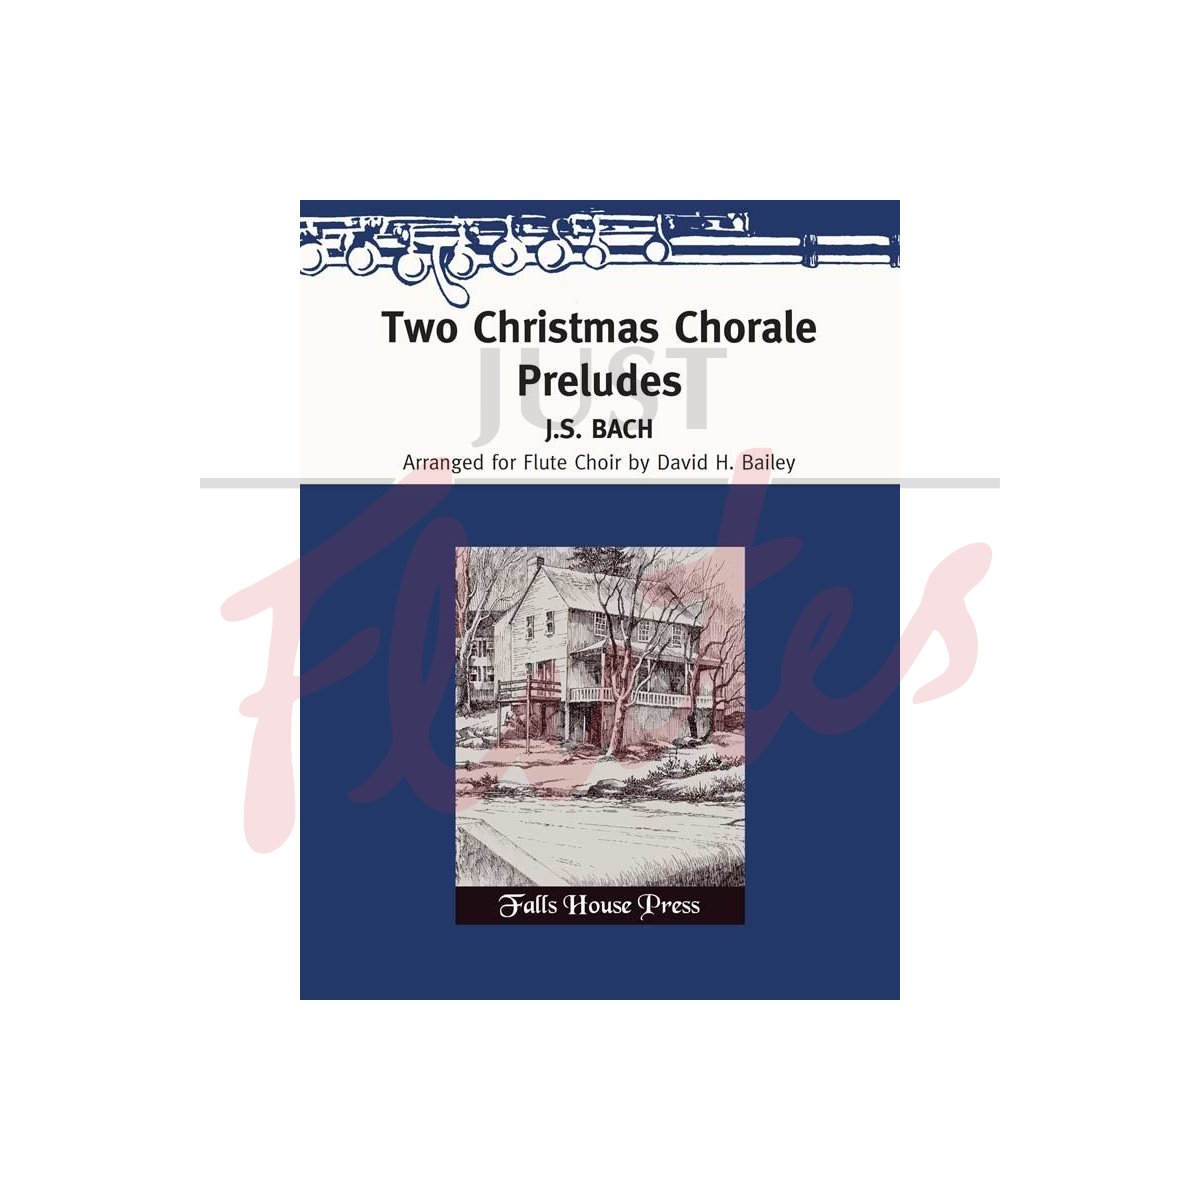 Two Christmas Chorale Preludes